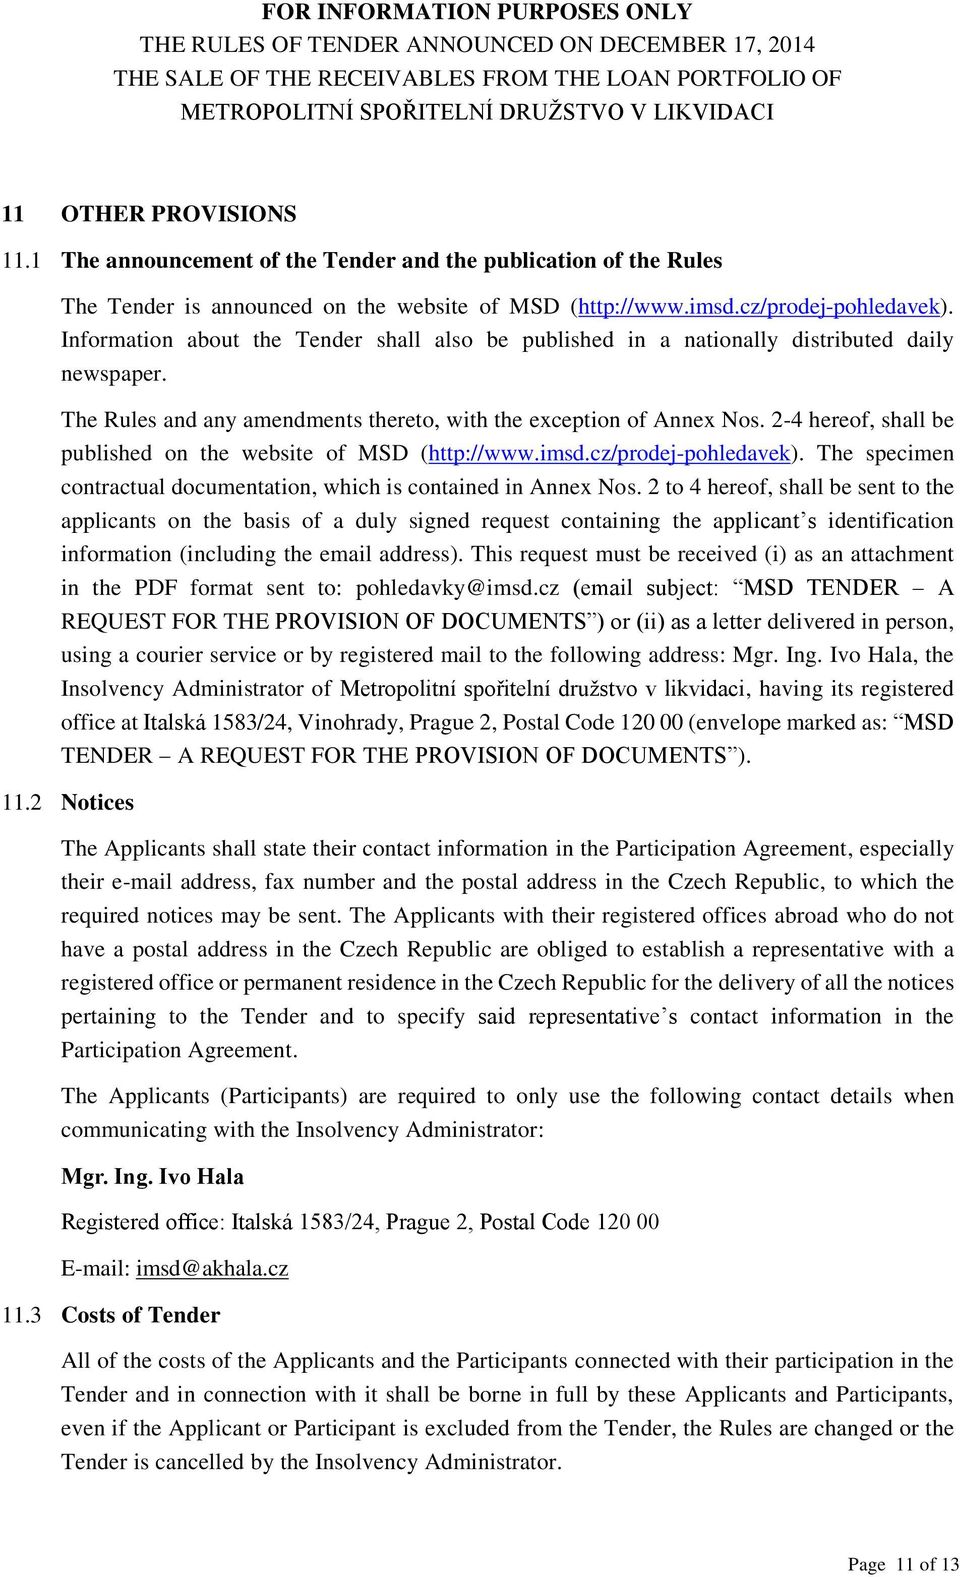 2-4 hereof, shall be published on the website of MSD (http://www.imsd.cz/prodej-pohledavek). The specimen contractual documentation, which is contained in Annex Nos.